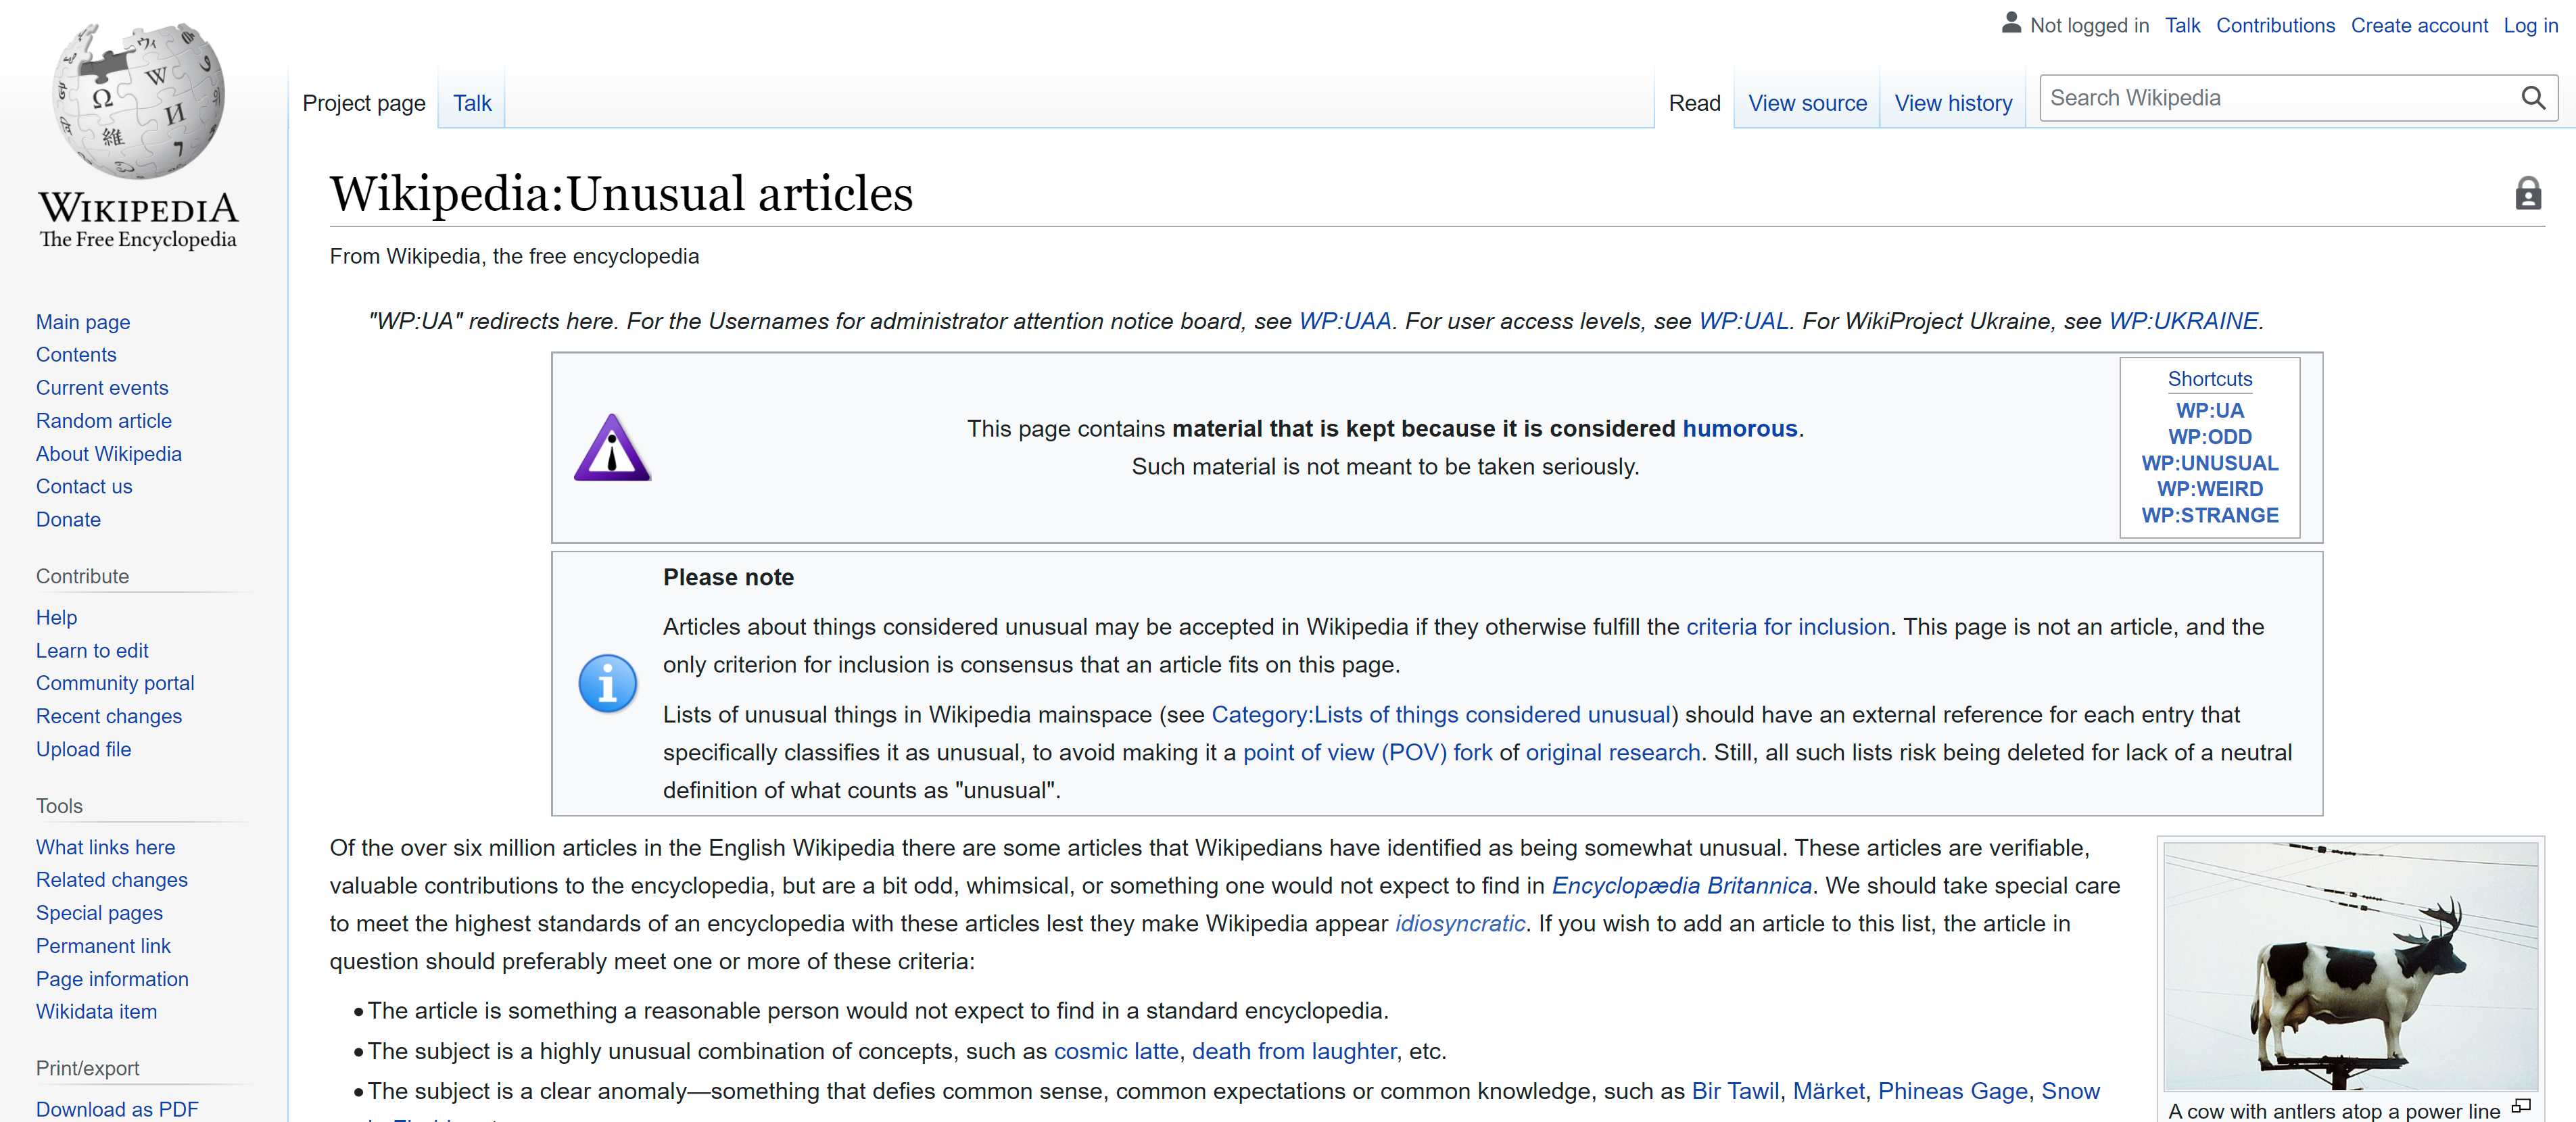 wiki-page